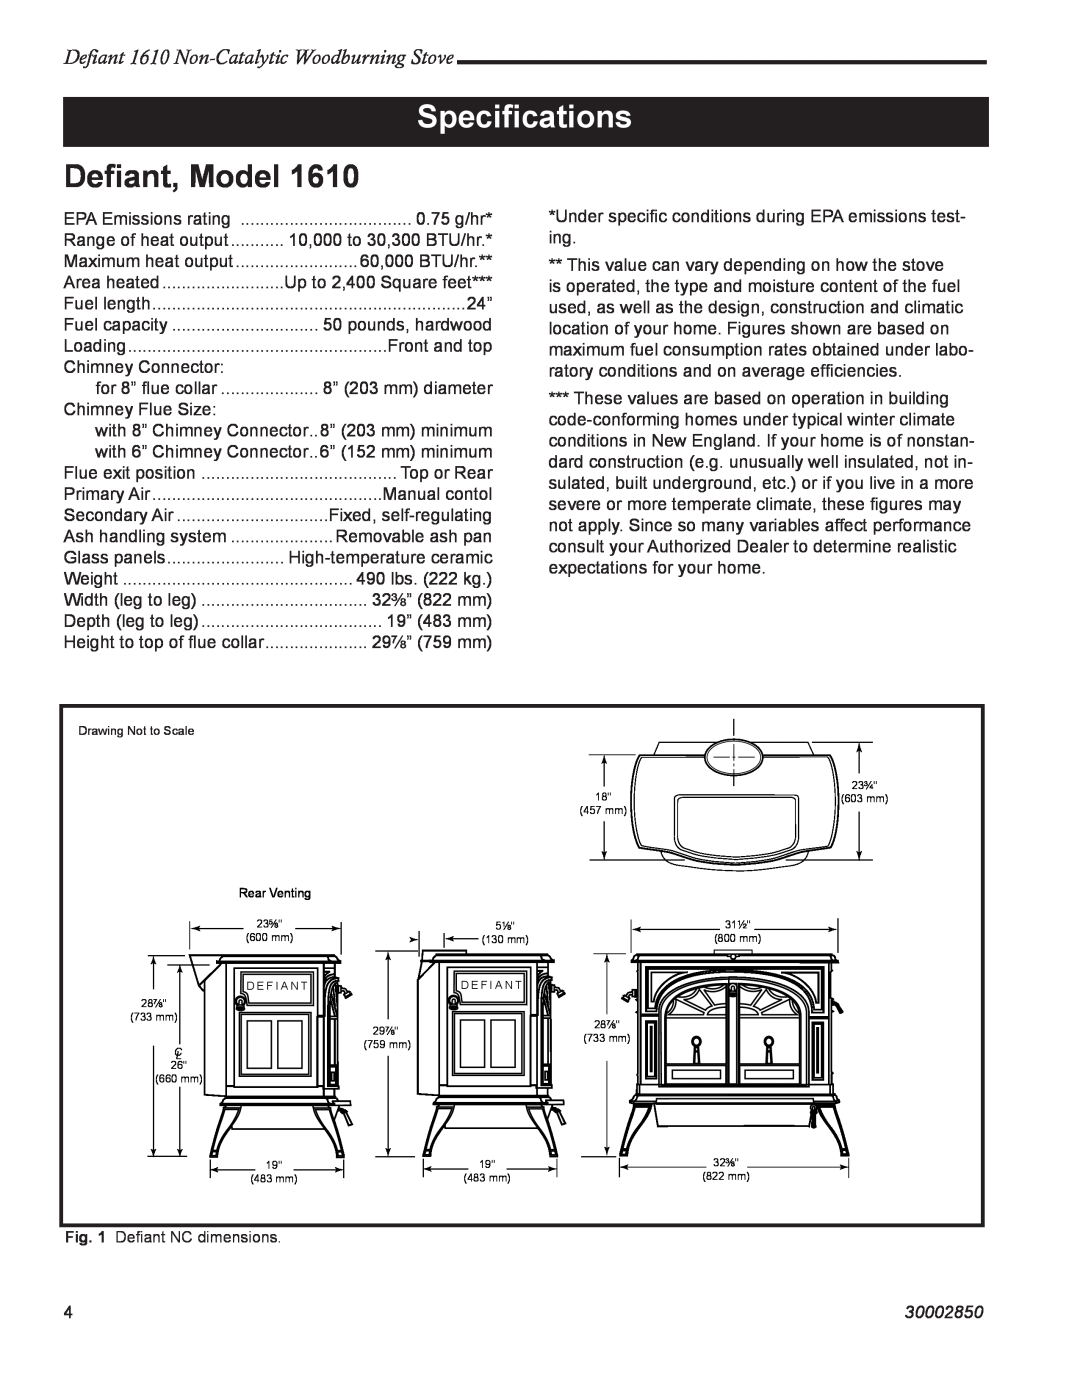 Vermont Casting Speciﬁcations, Deﬁant, Model, Defiant 1610 Non-CatalyticWoodburning Stove, 30002850 